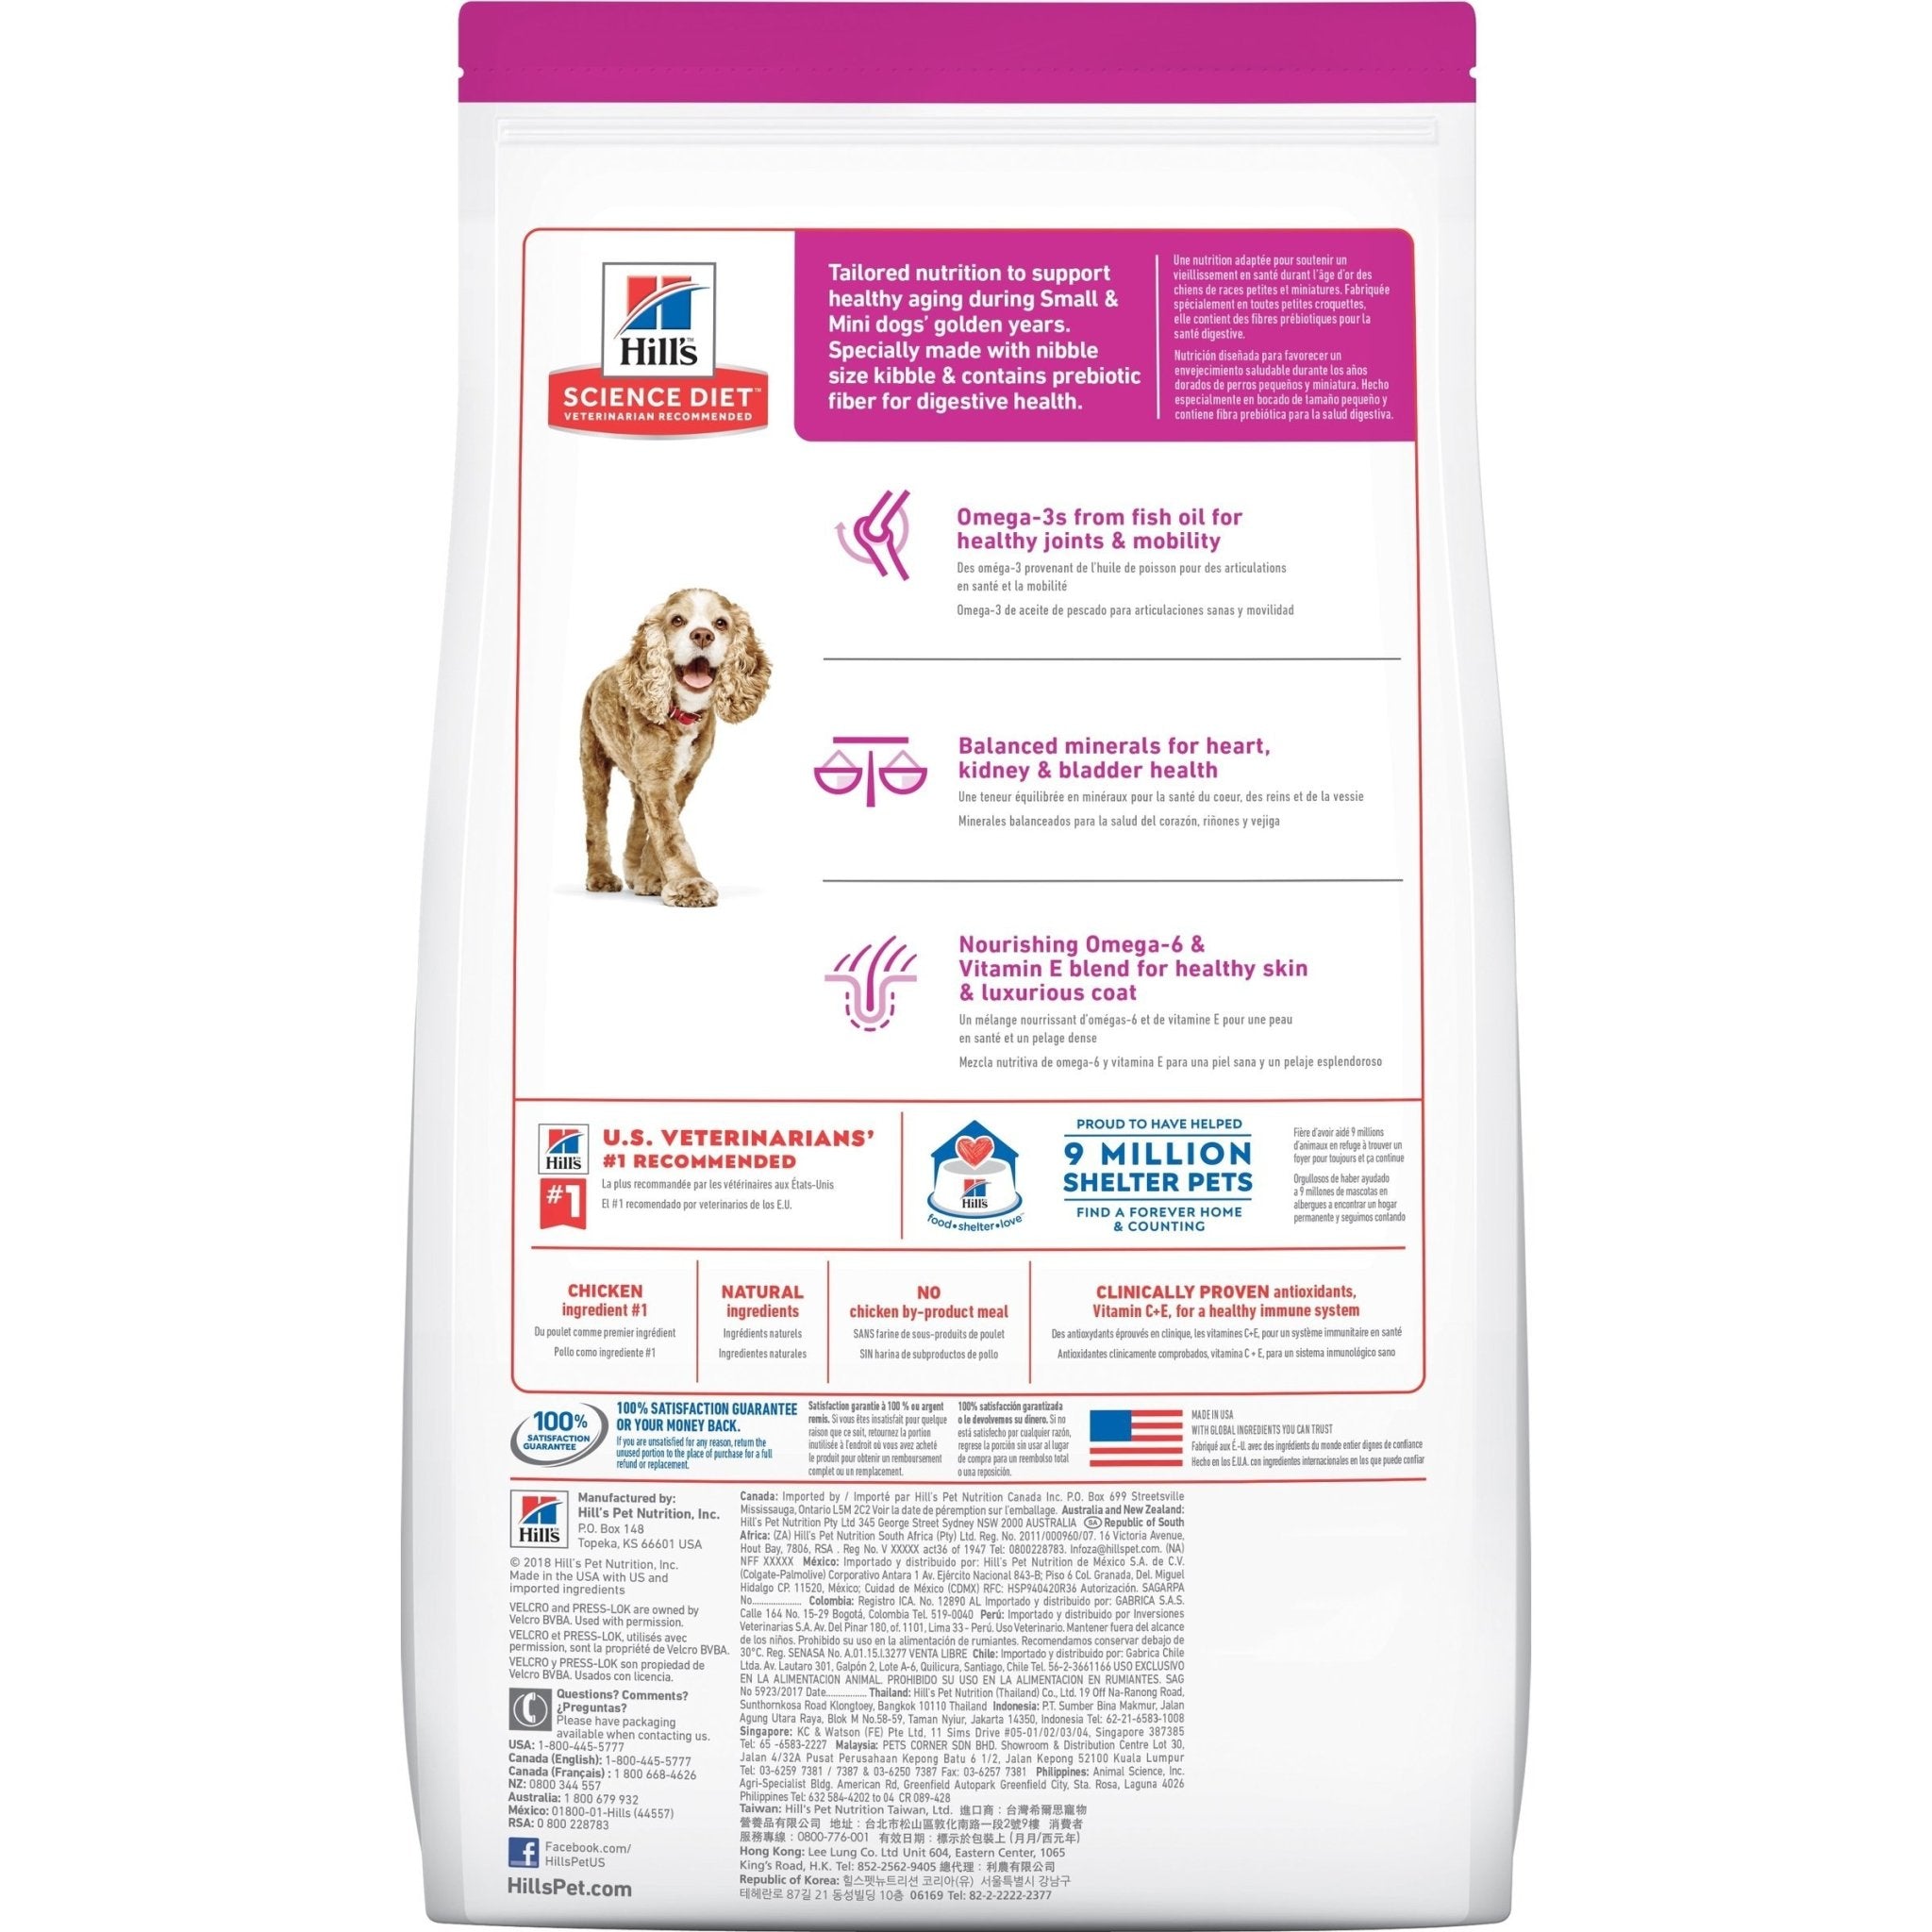 Hill's Science Diet Adult 11+ Small Paws Senior Dry Dog Food 2.04kg